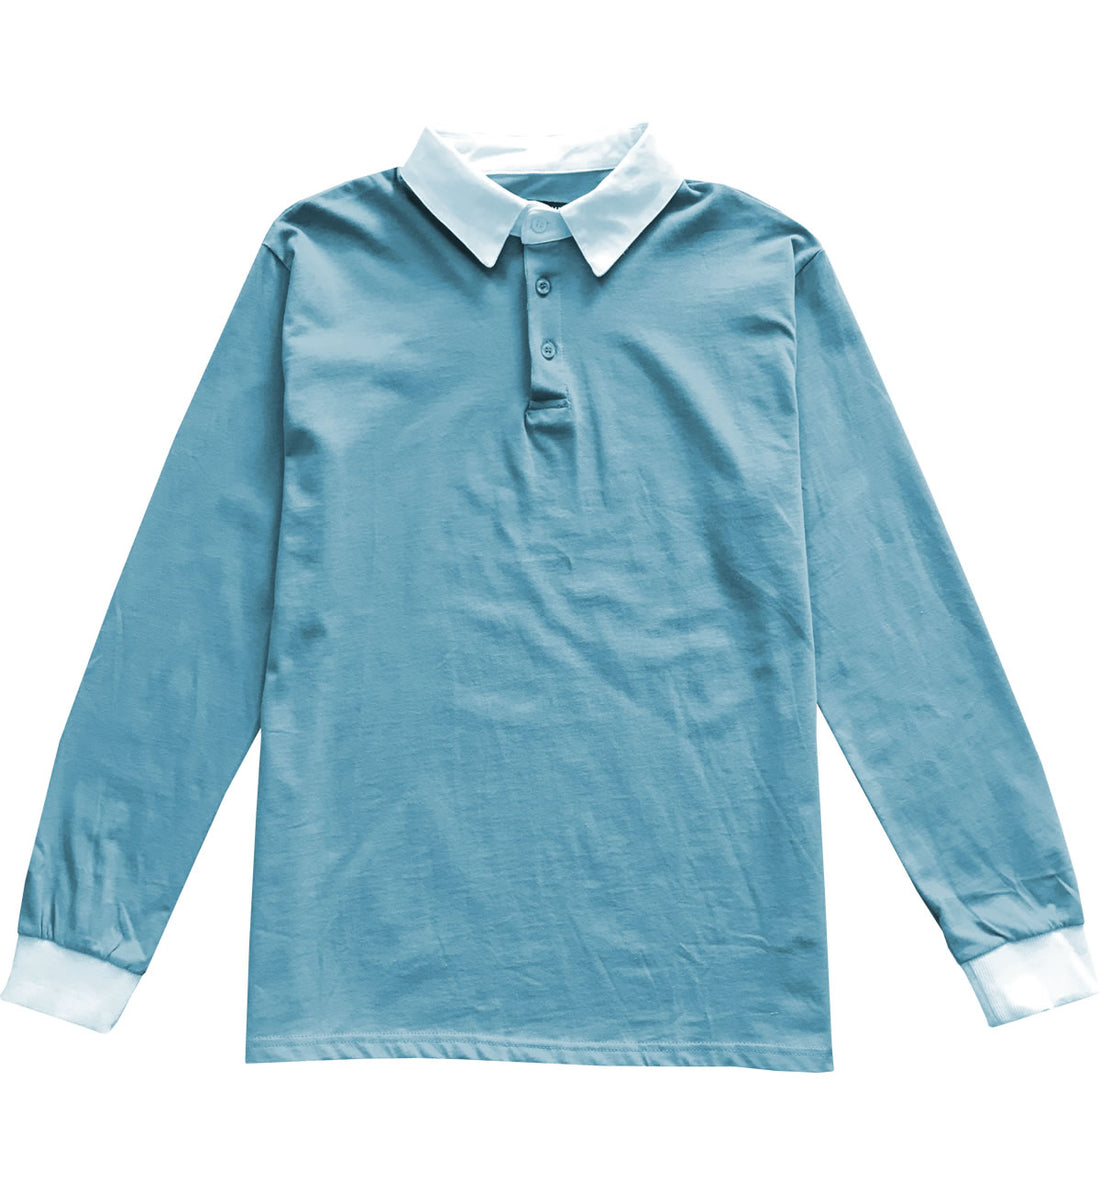 Solid Light Blue with White Collar Mens Long Sleeve Polo Rugby Shirt